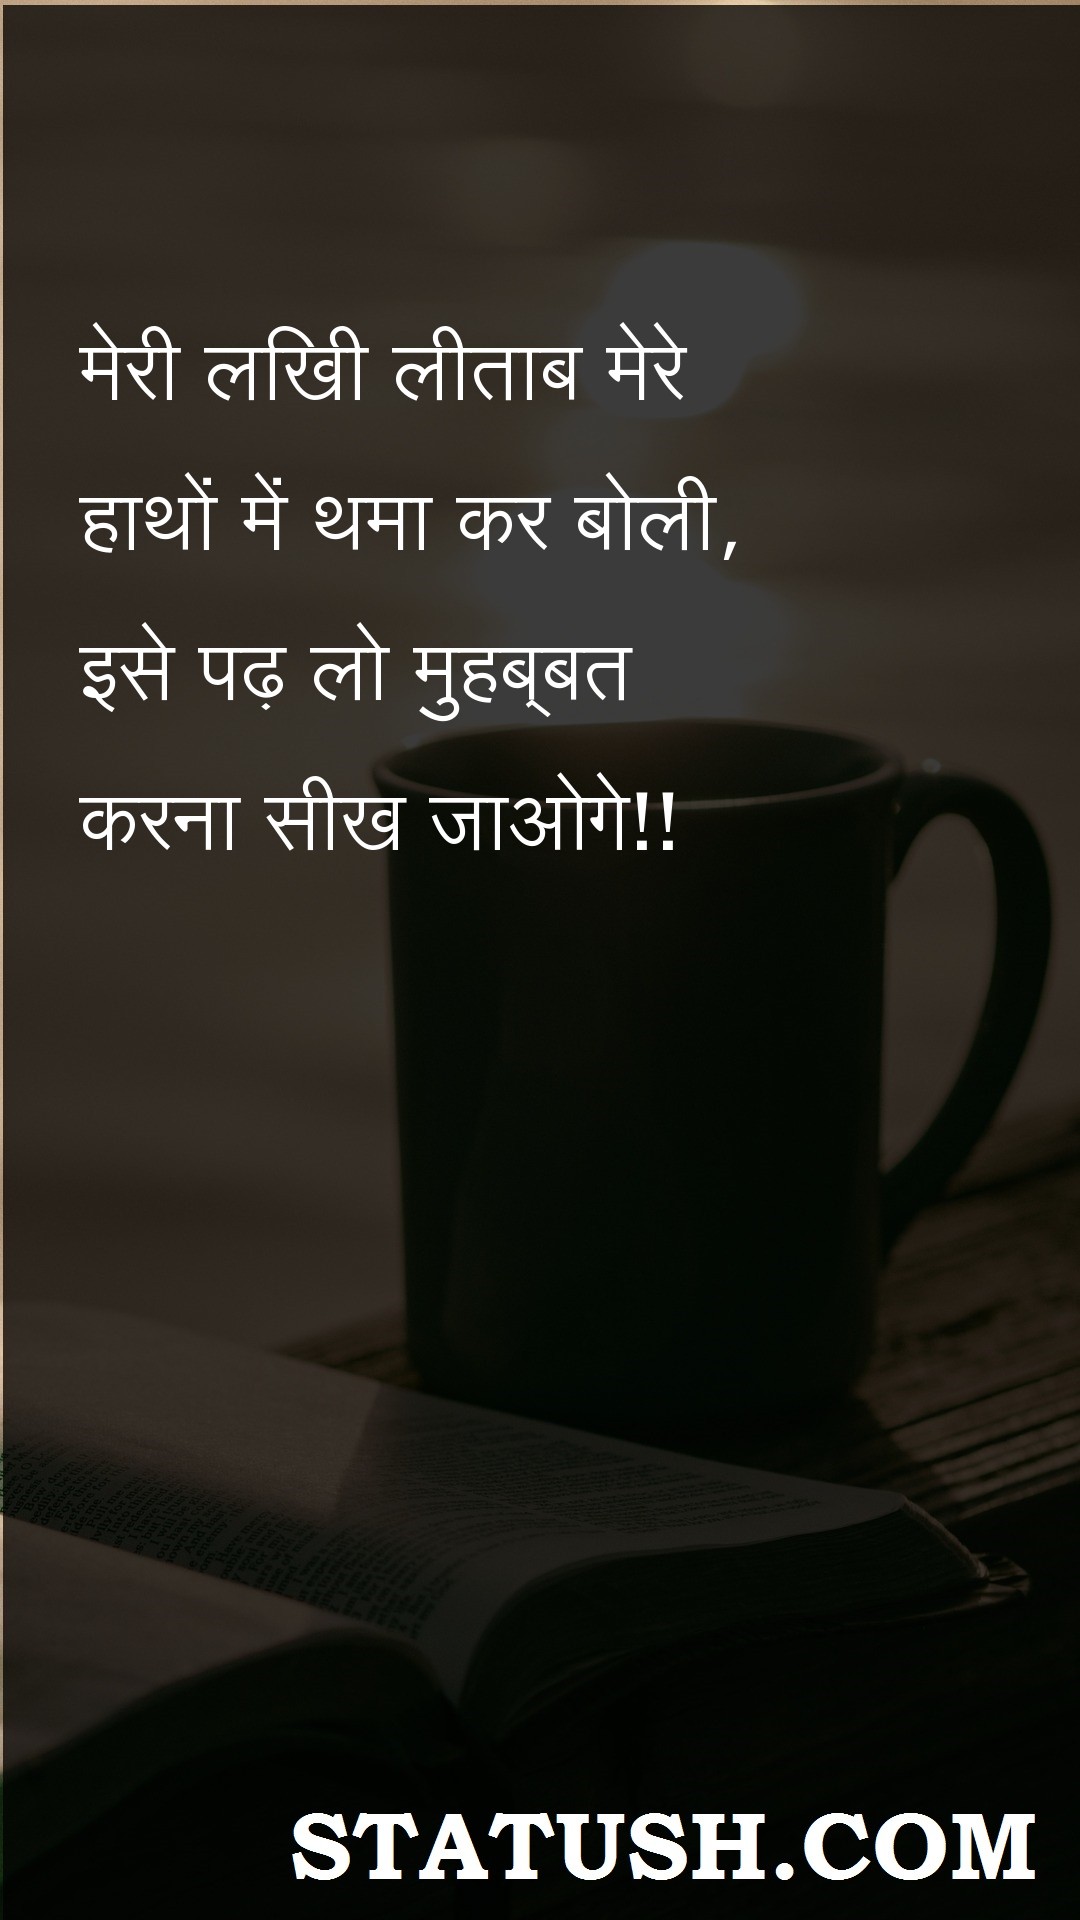 you will learn to love it - Hindi Quotes at statush.com